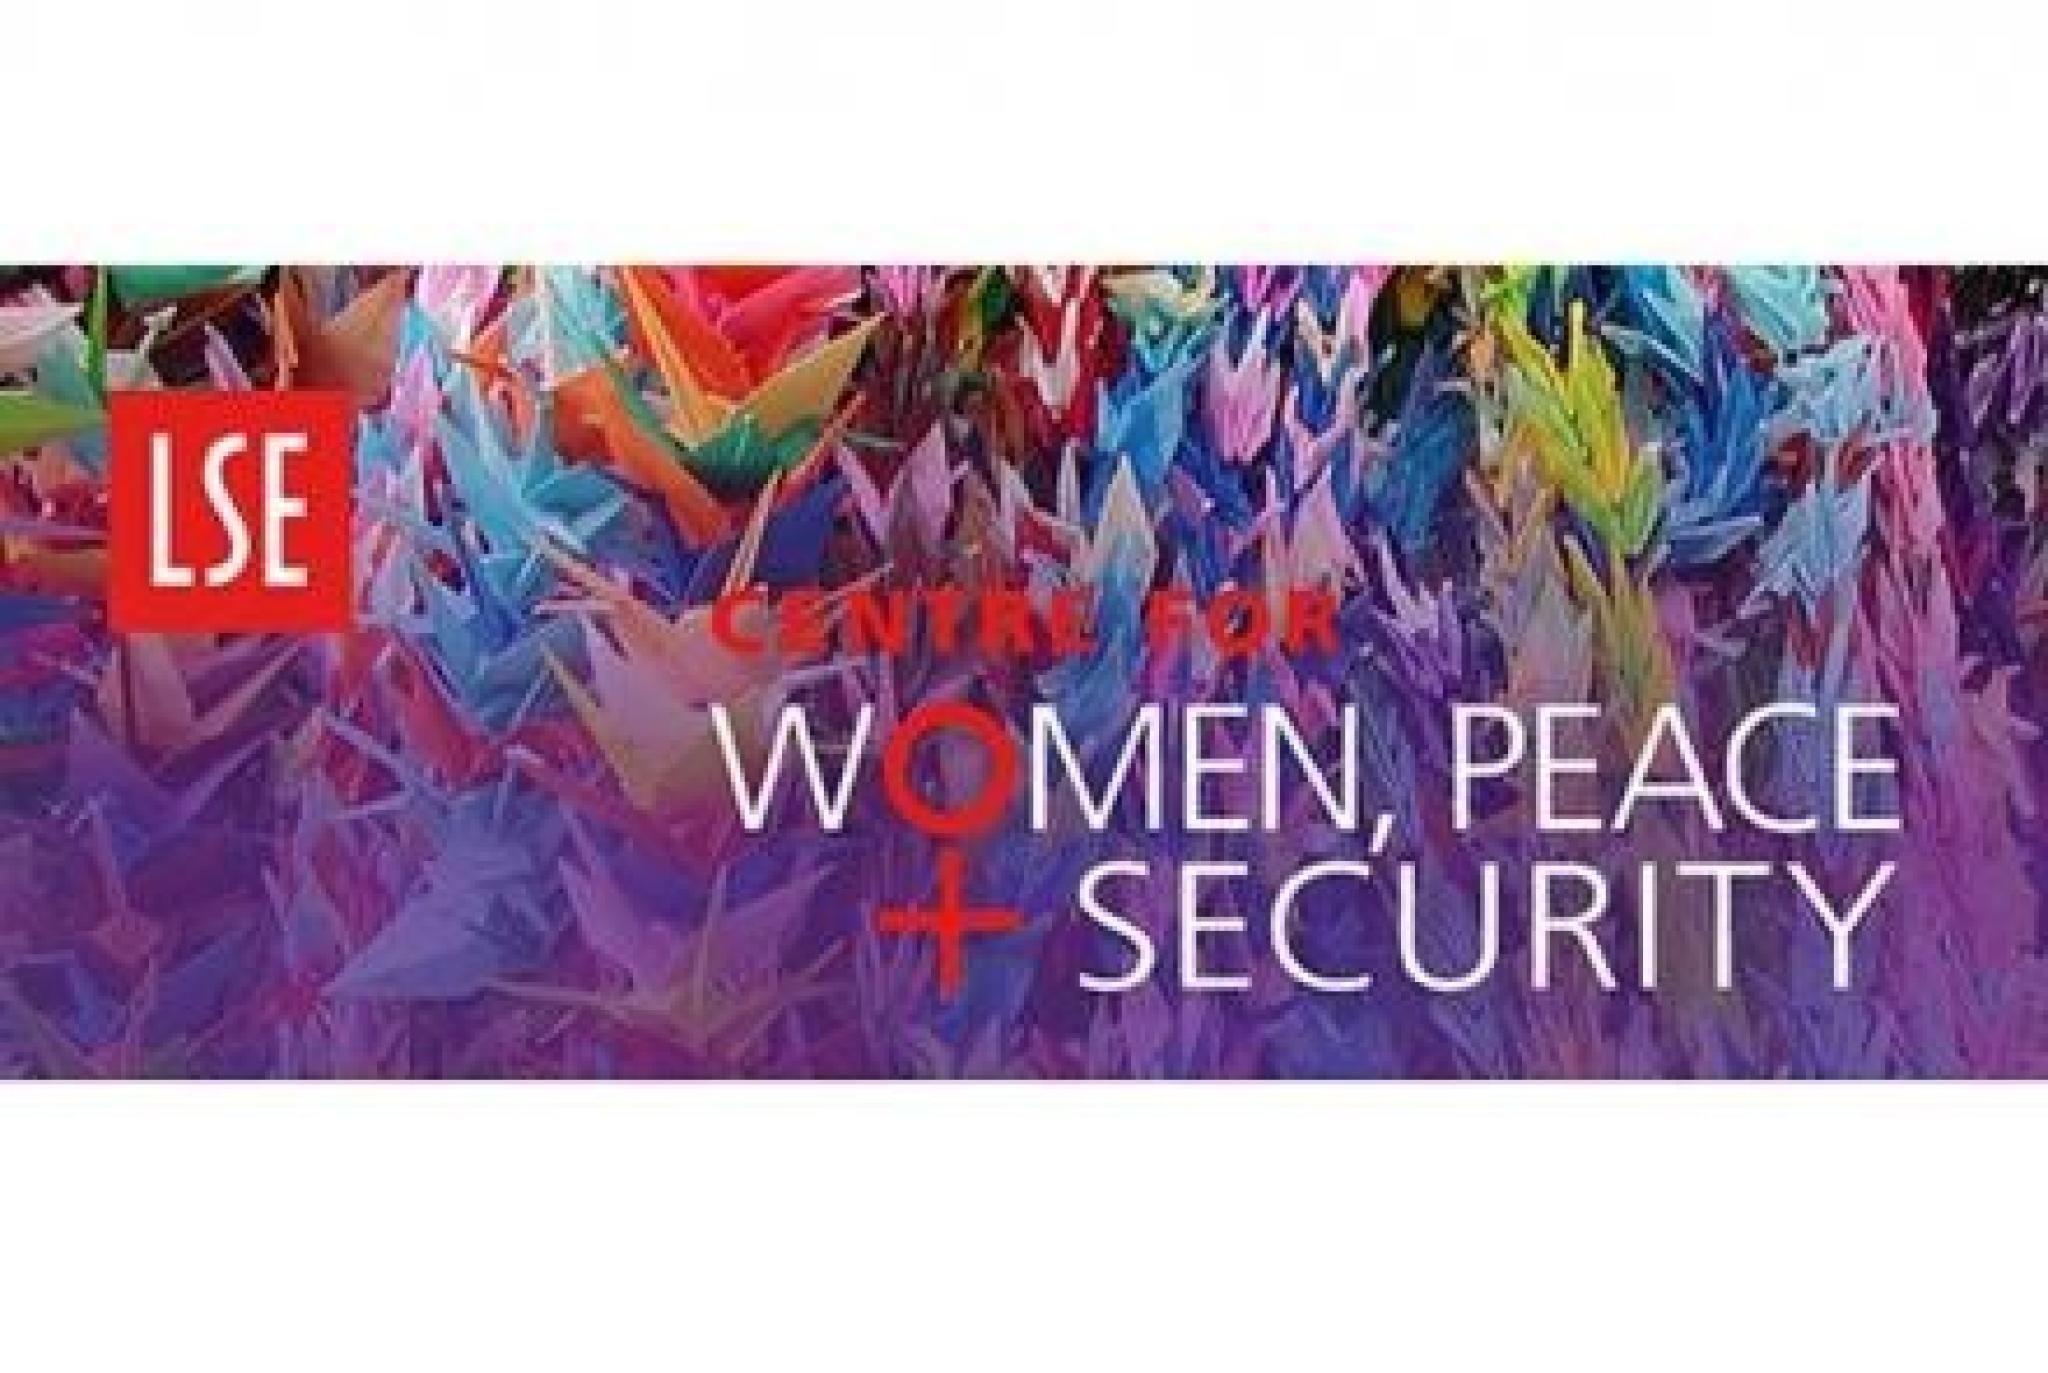 Image: Centre for Women, peace and security